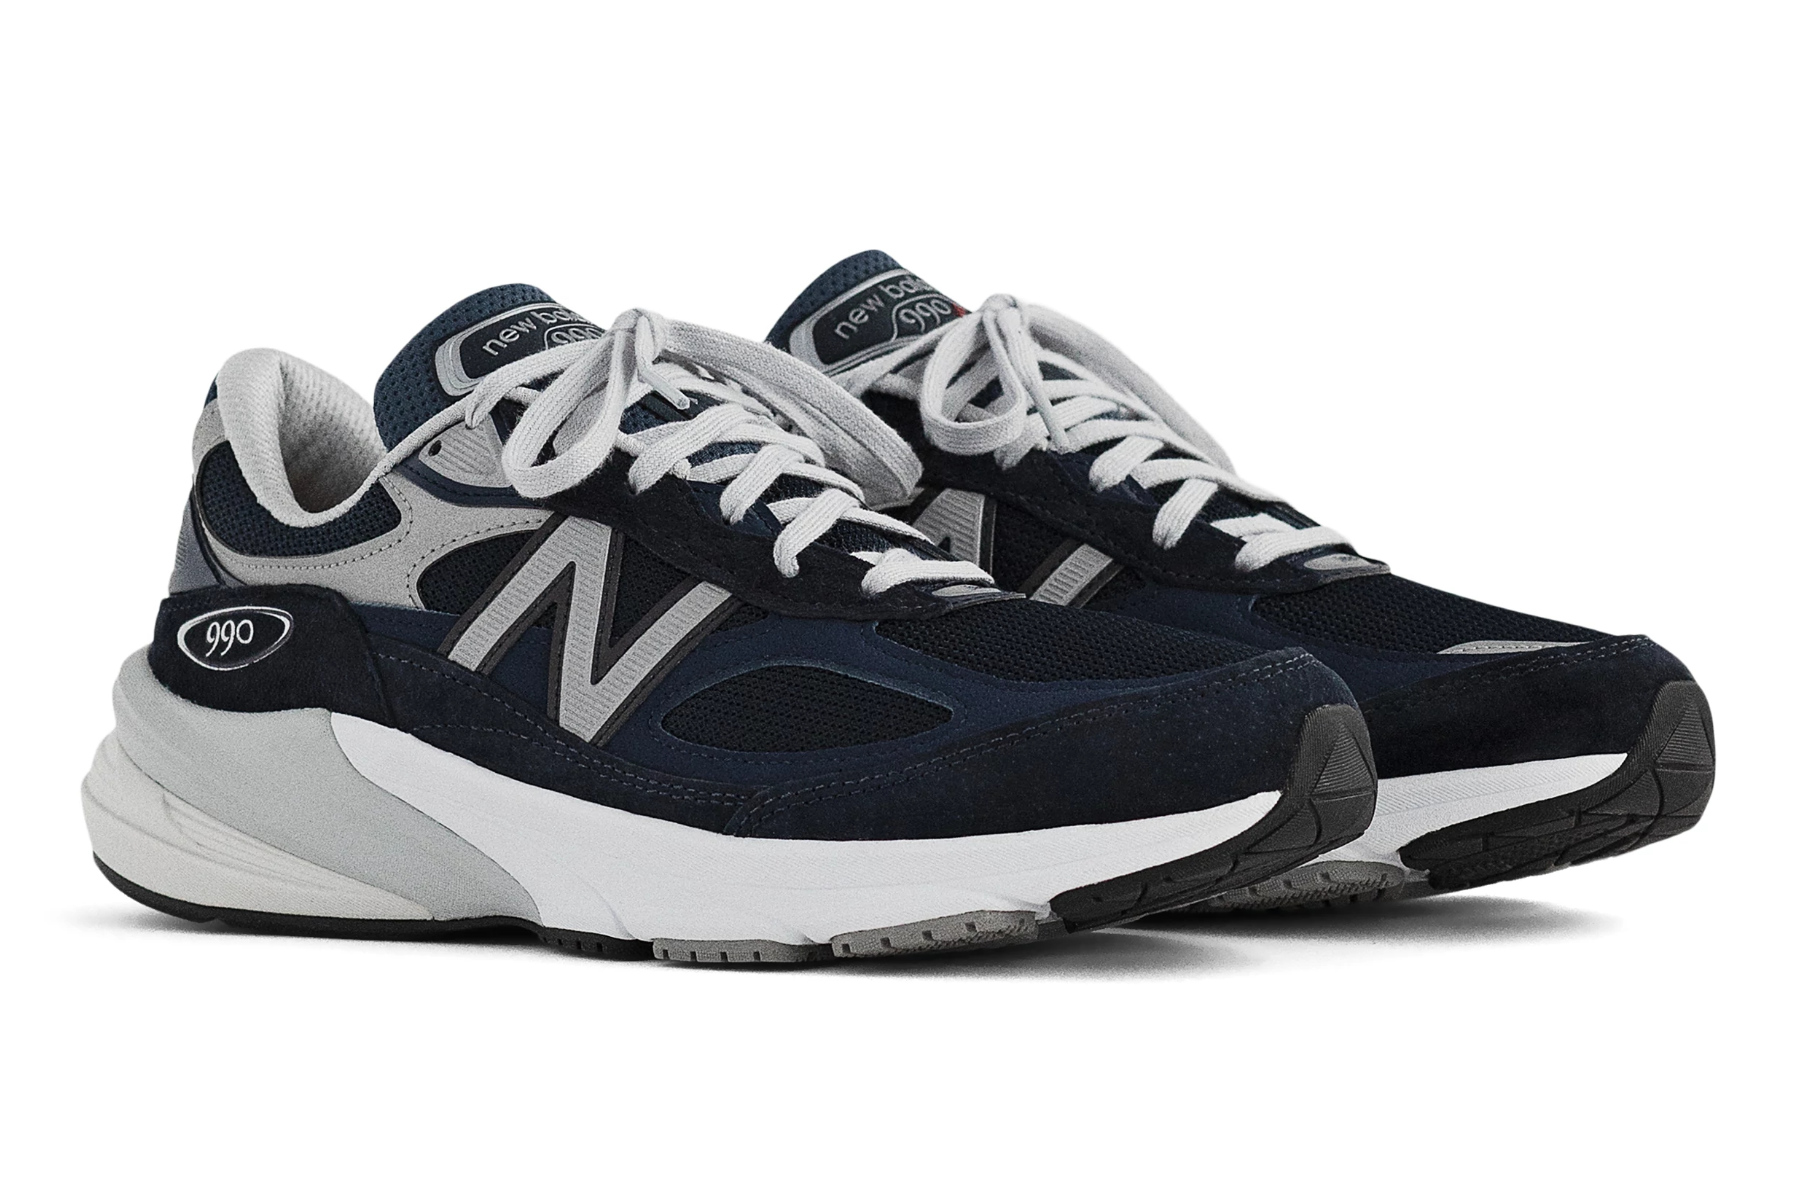 New Balance's Latest 990v6 Sneaker Is Perfectly Boring